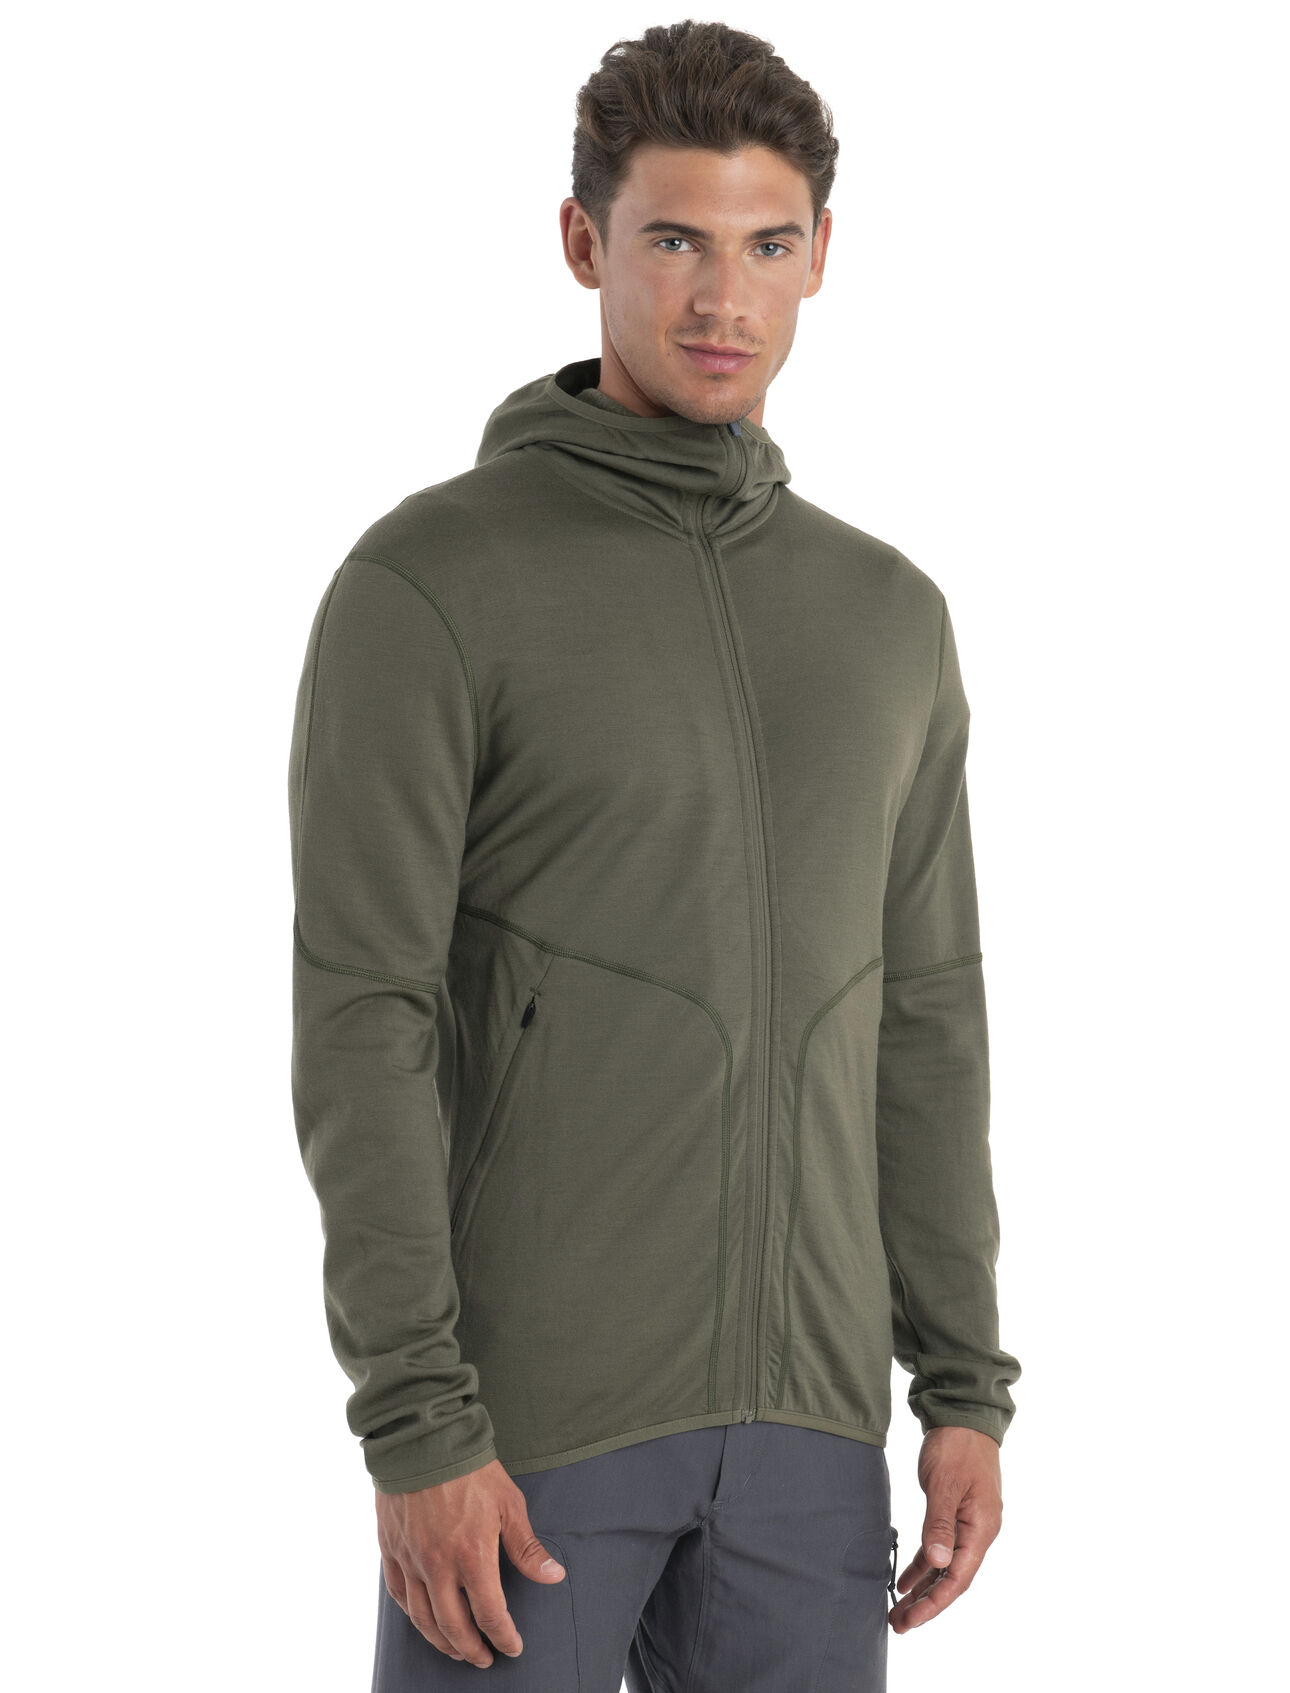 Mens Merino 560 RealFleece™ Elemental II Long Sleeve Zip Hood A heavyweight midlayer fleece ideal for cold-weather training, skiing or alpine climbing, the 560 Realfleece™ Elemental II Long Sleeve Zip Hood features 100% Merino wool to naturally insulate, breathe and regulate your temperature.